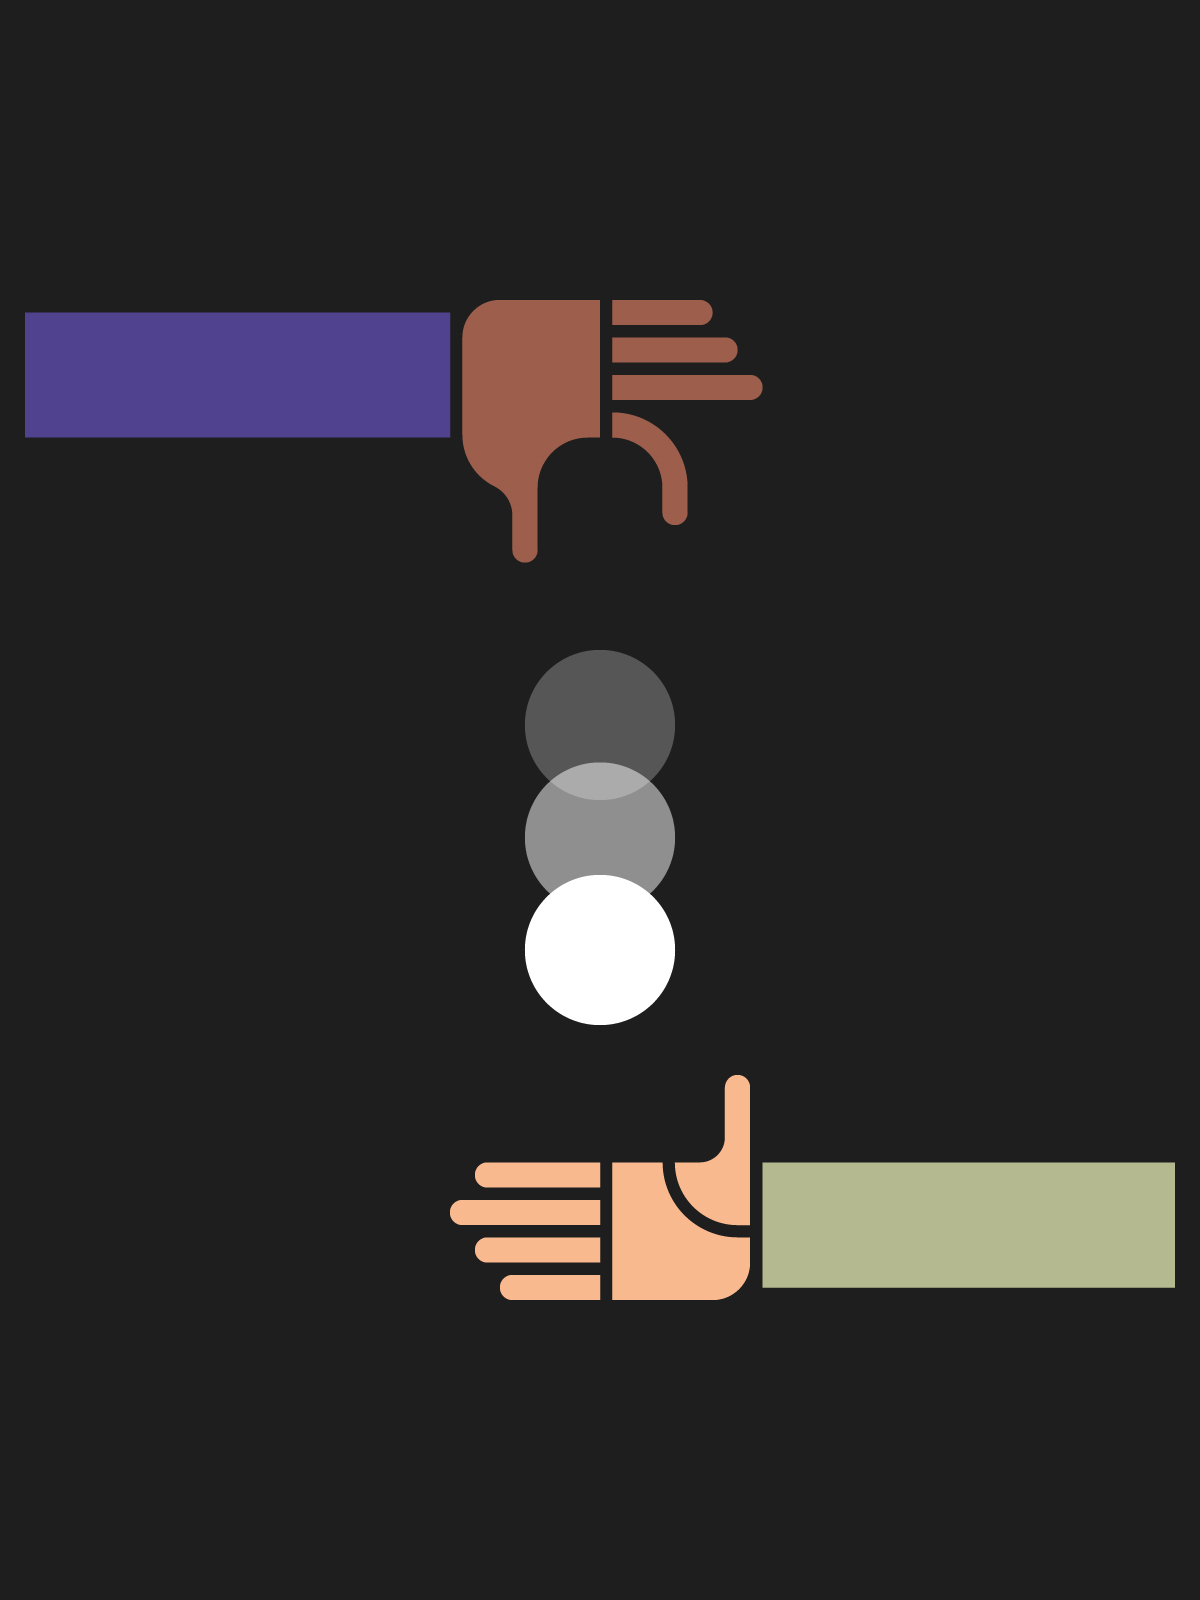 Illustration depicting two stylised hands passing a ball between each other.